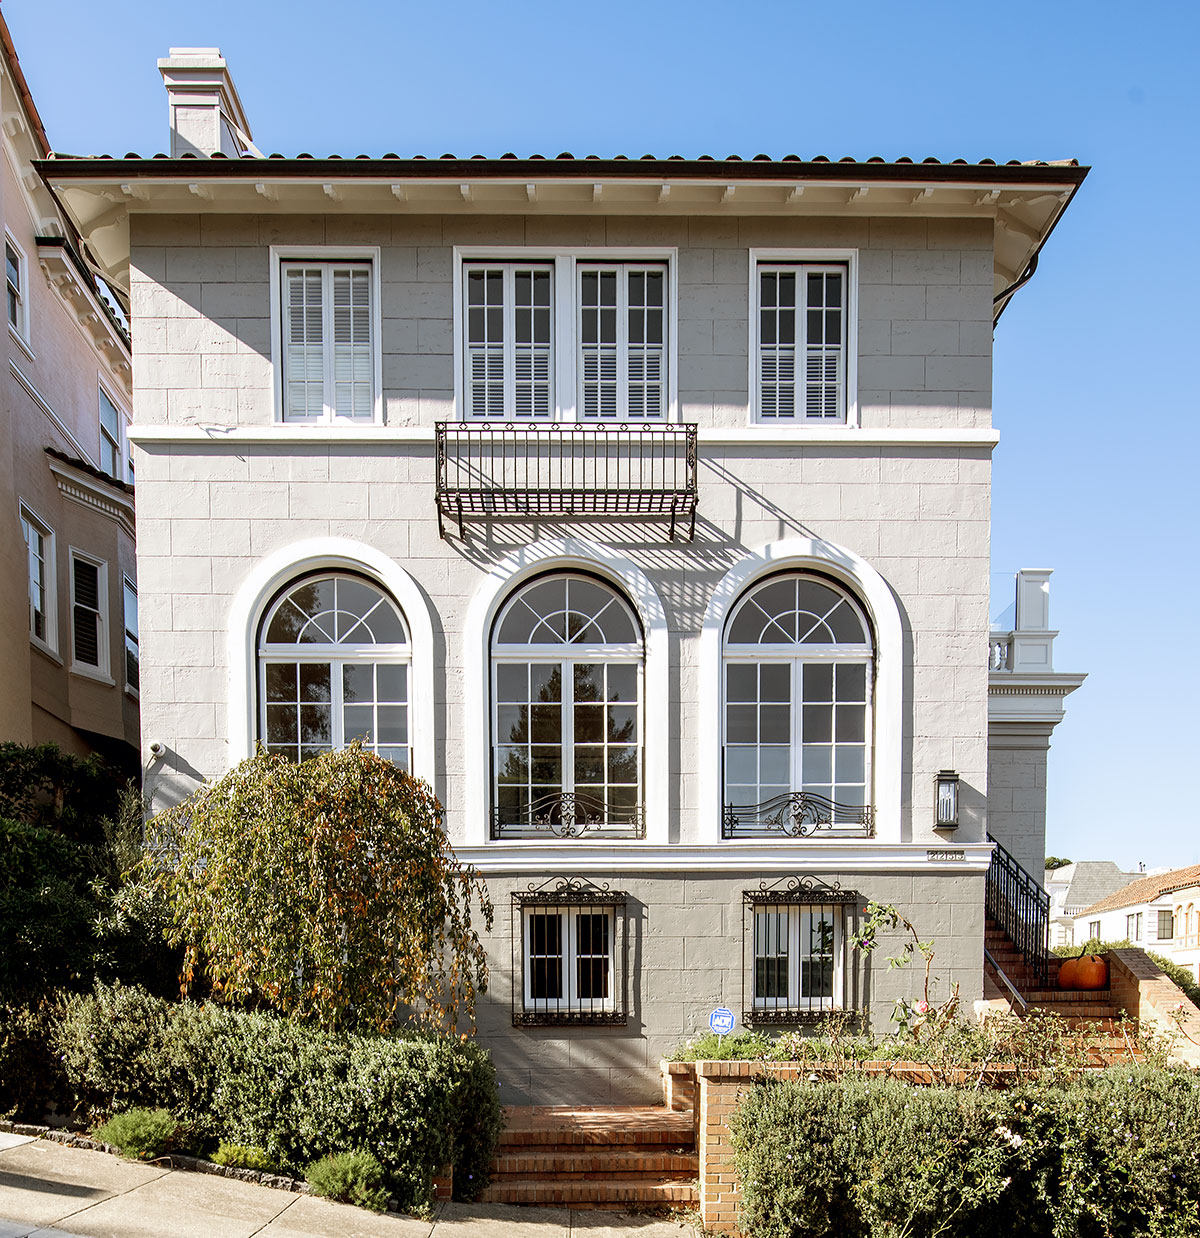 2255 Octavia Street in Pacific Heights, designed by Edward E. Young, built 1925